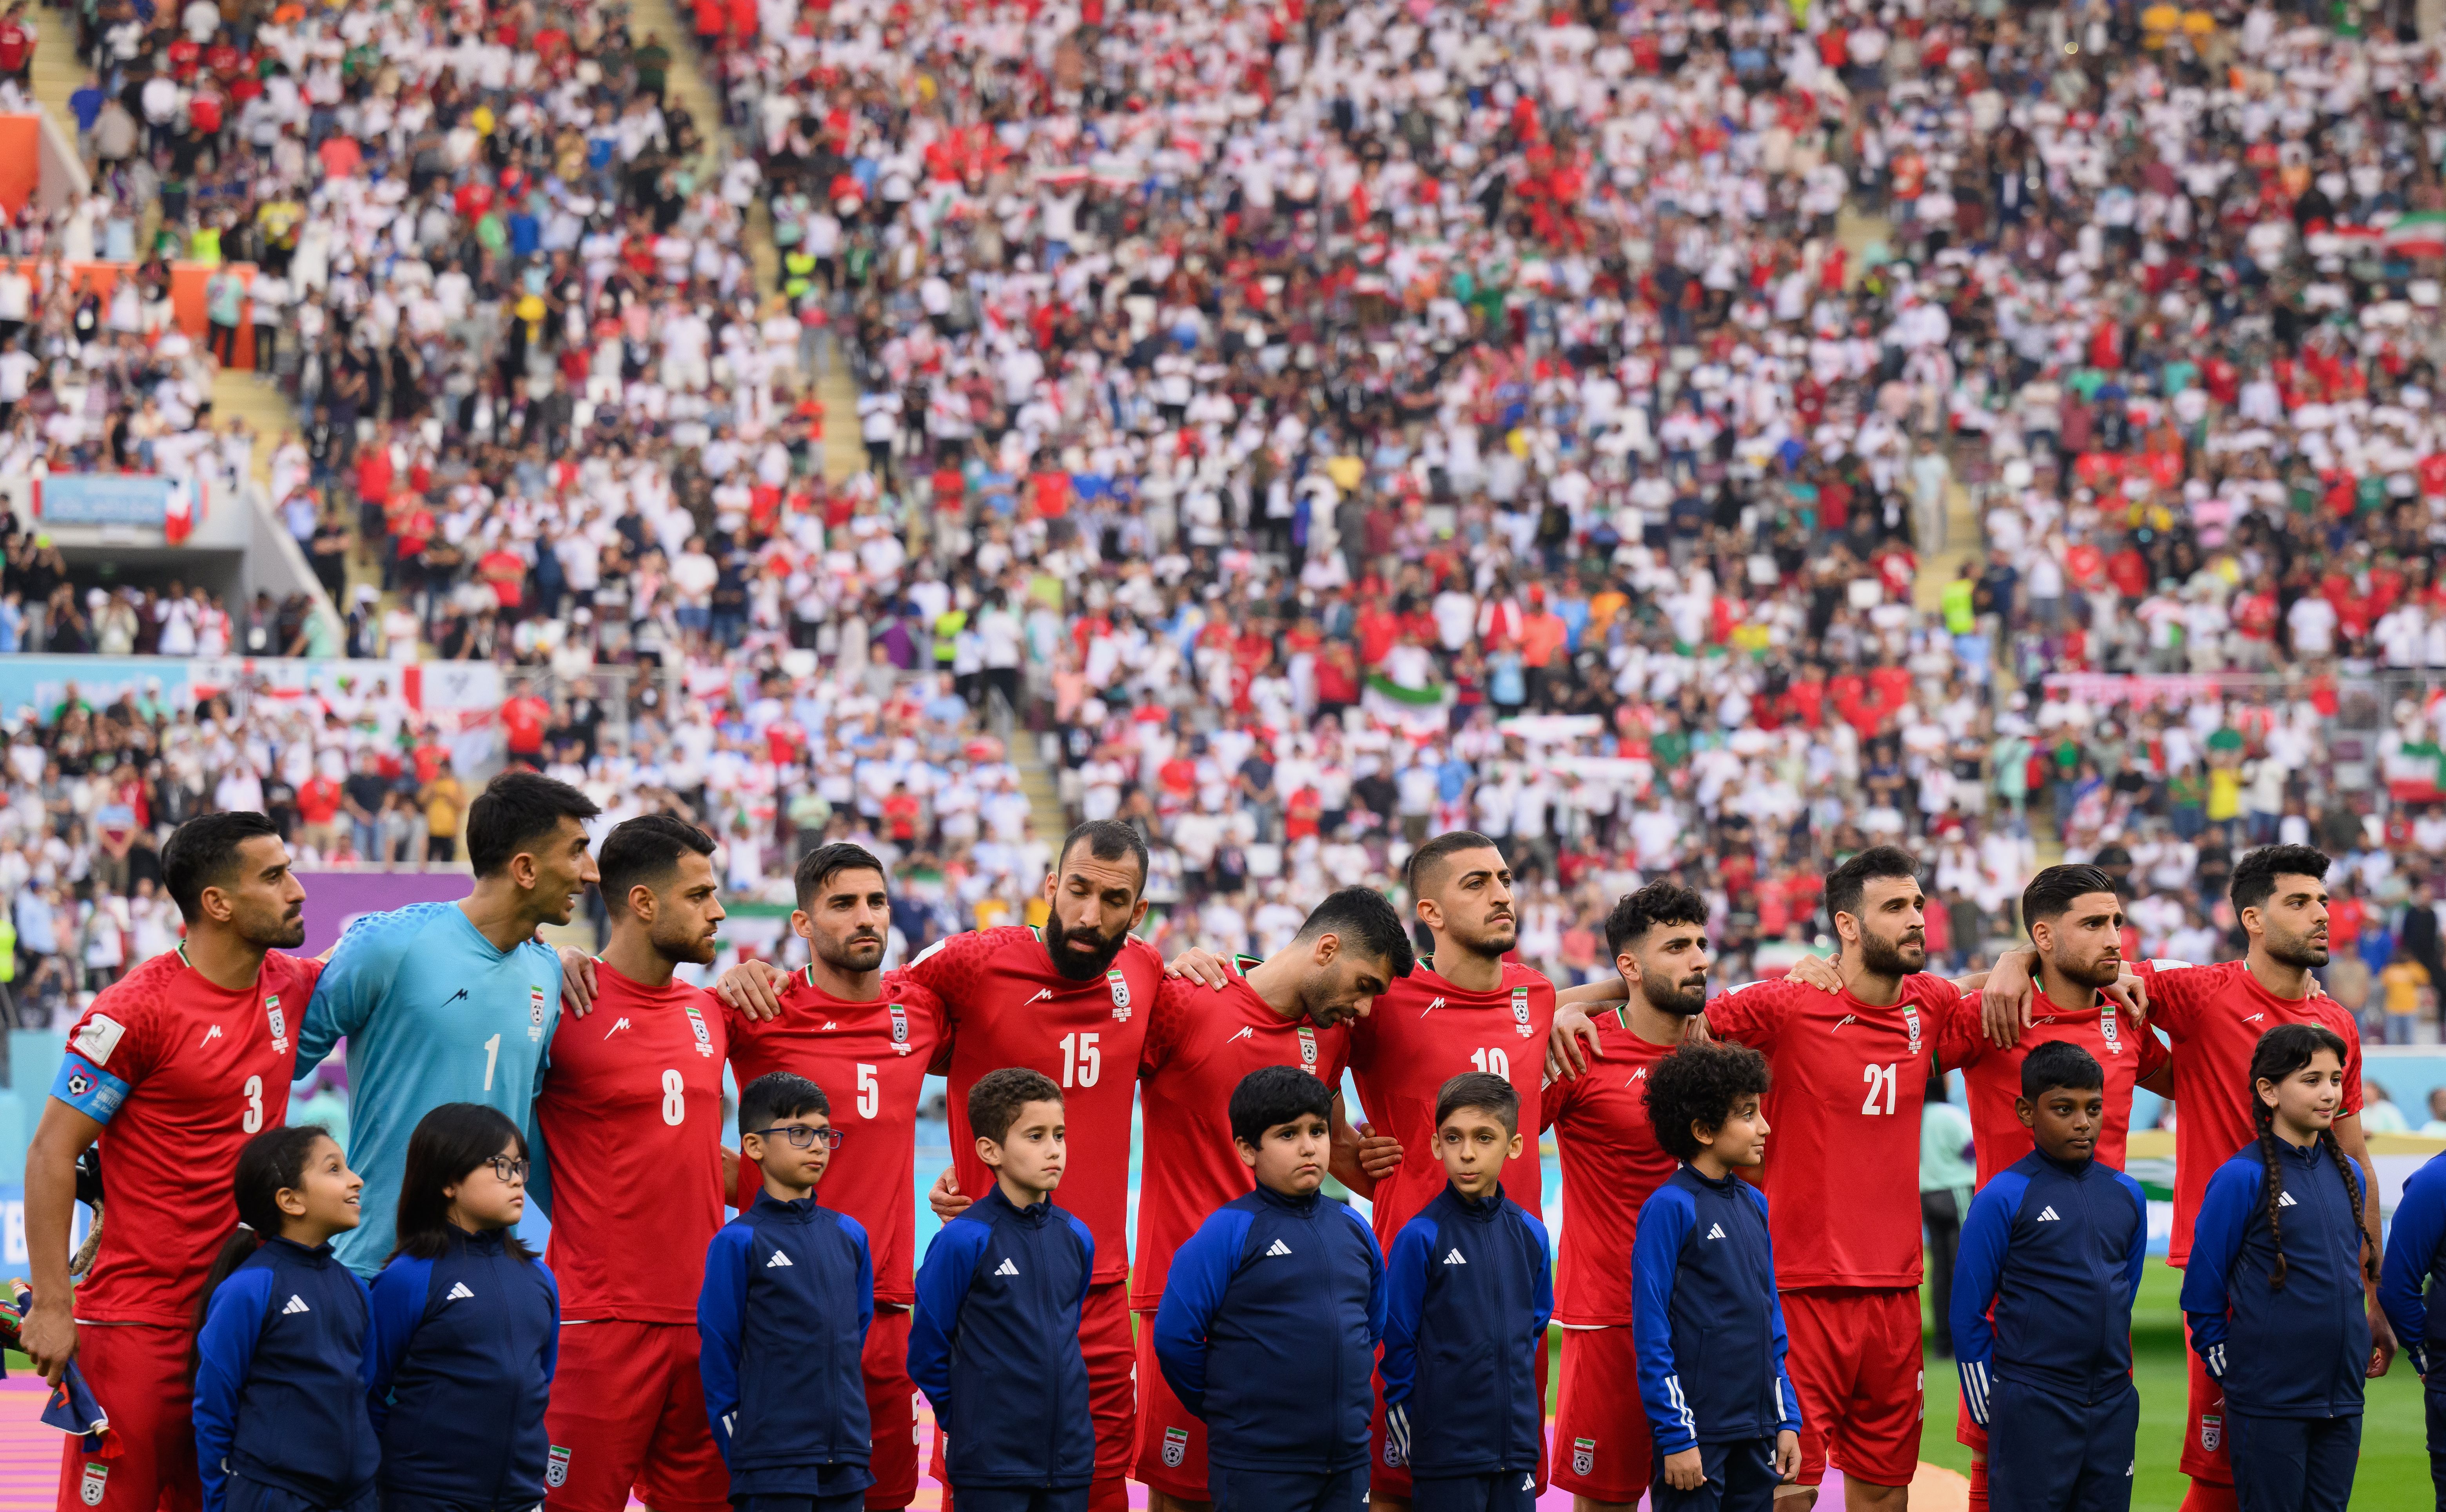  Iranian players line up for the national anthem prior to the FIFA World Cup Qatar 2022 Group B match between England and IR Iran at Khalifa International Stadium on November 21, 2022 in Doha, Qatar. 